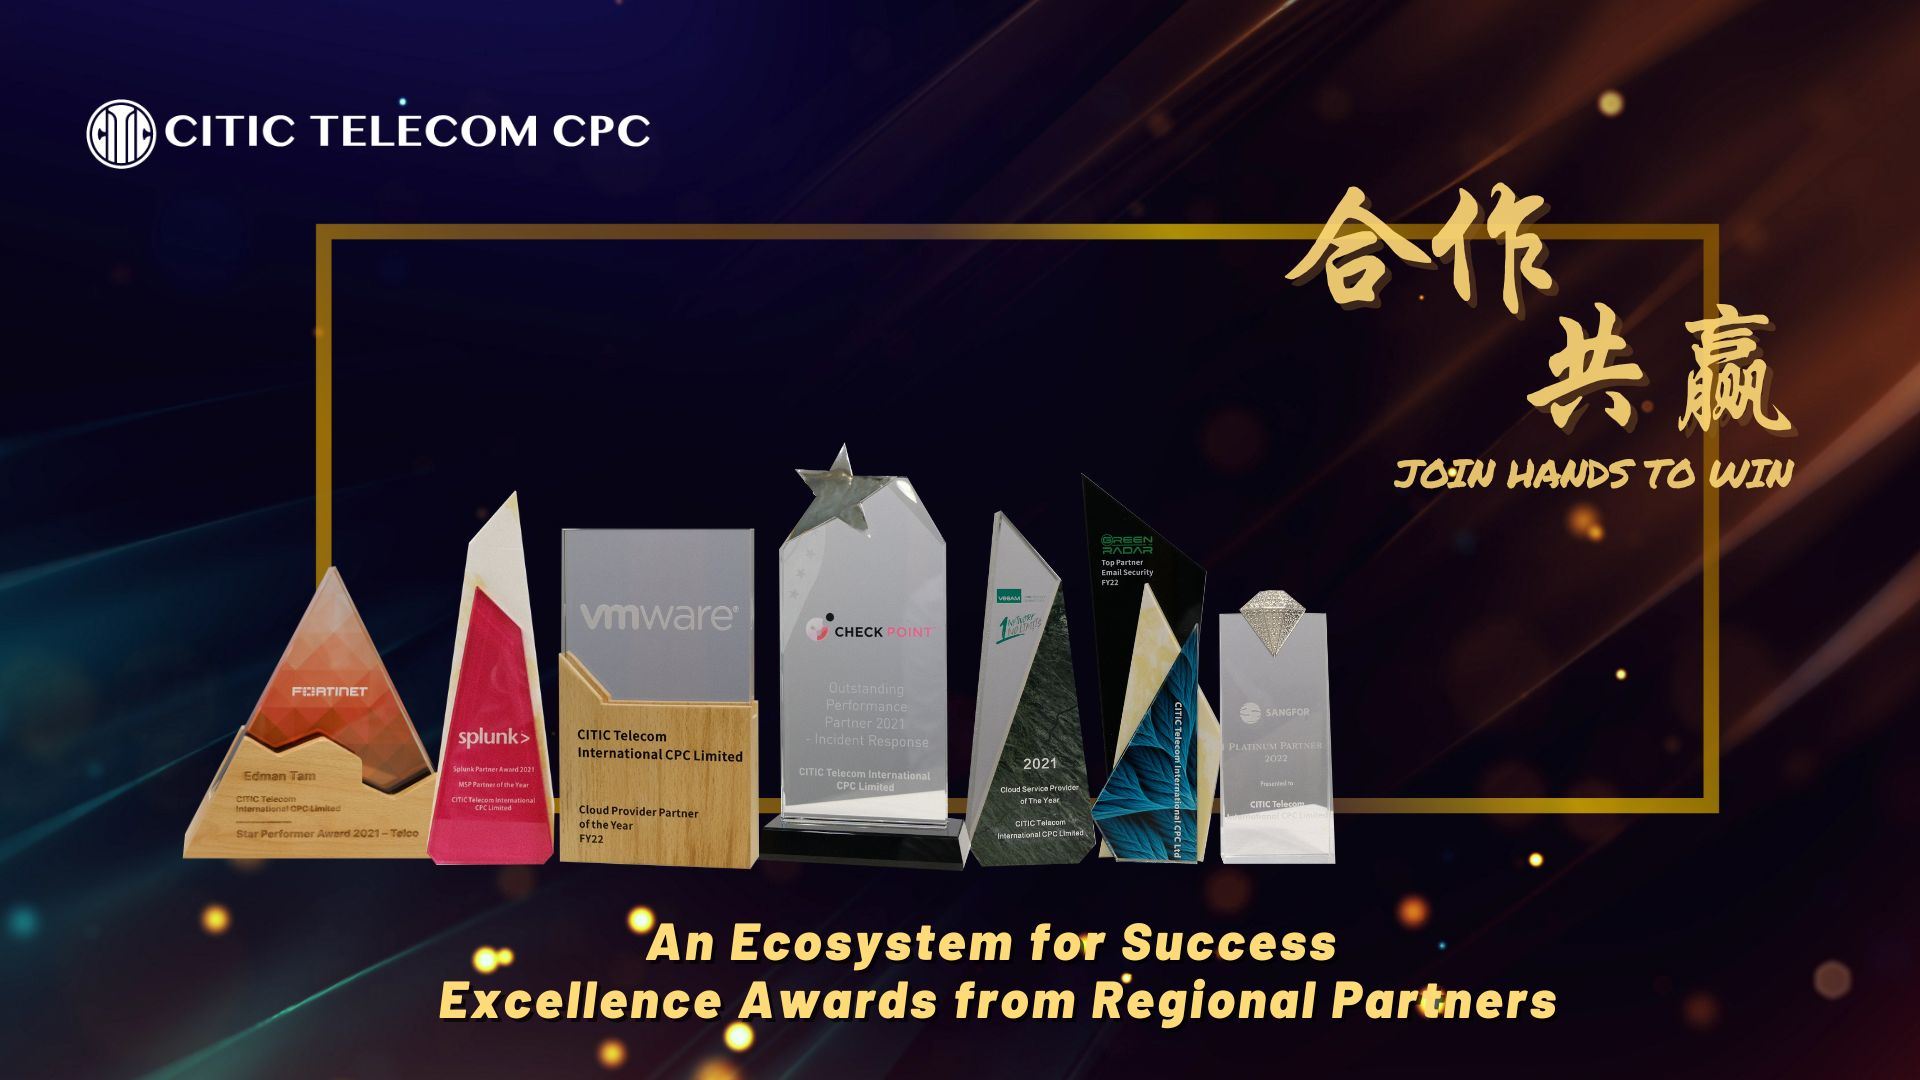 Excellence awards from multiple regional partners in the first half of 2022